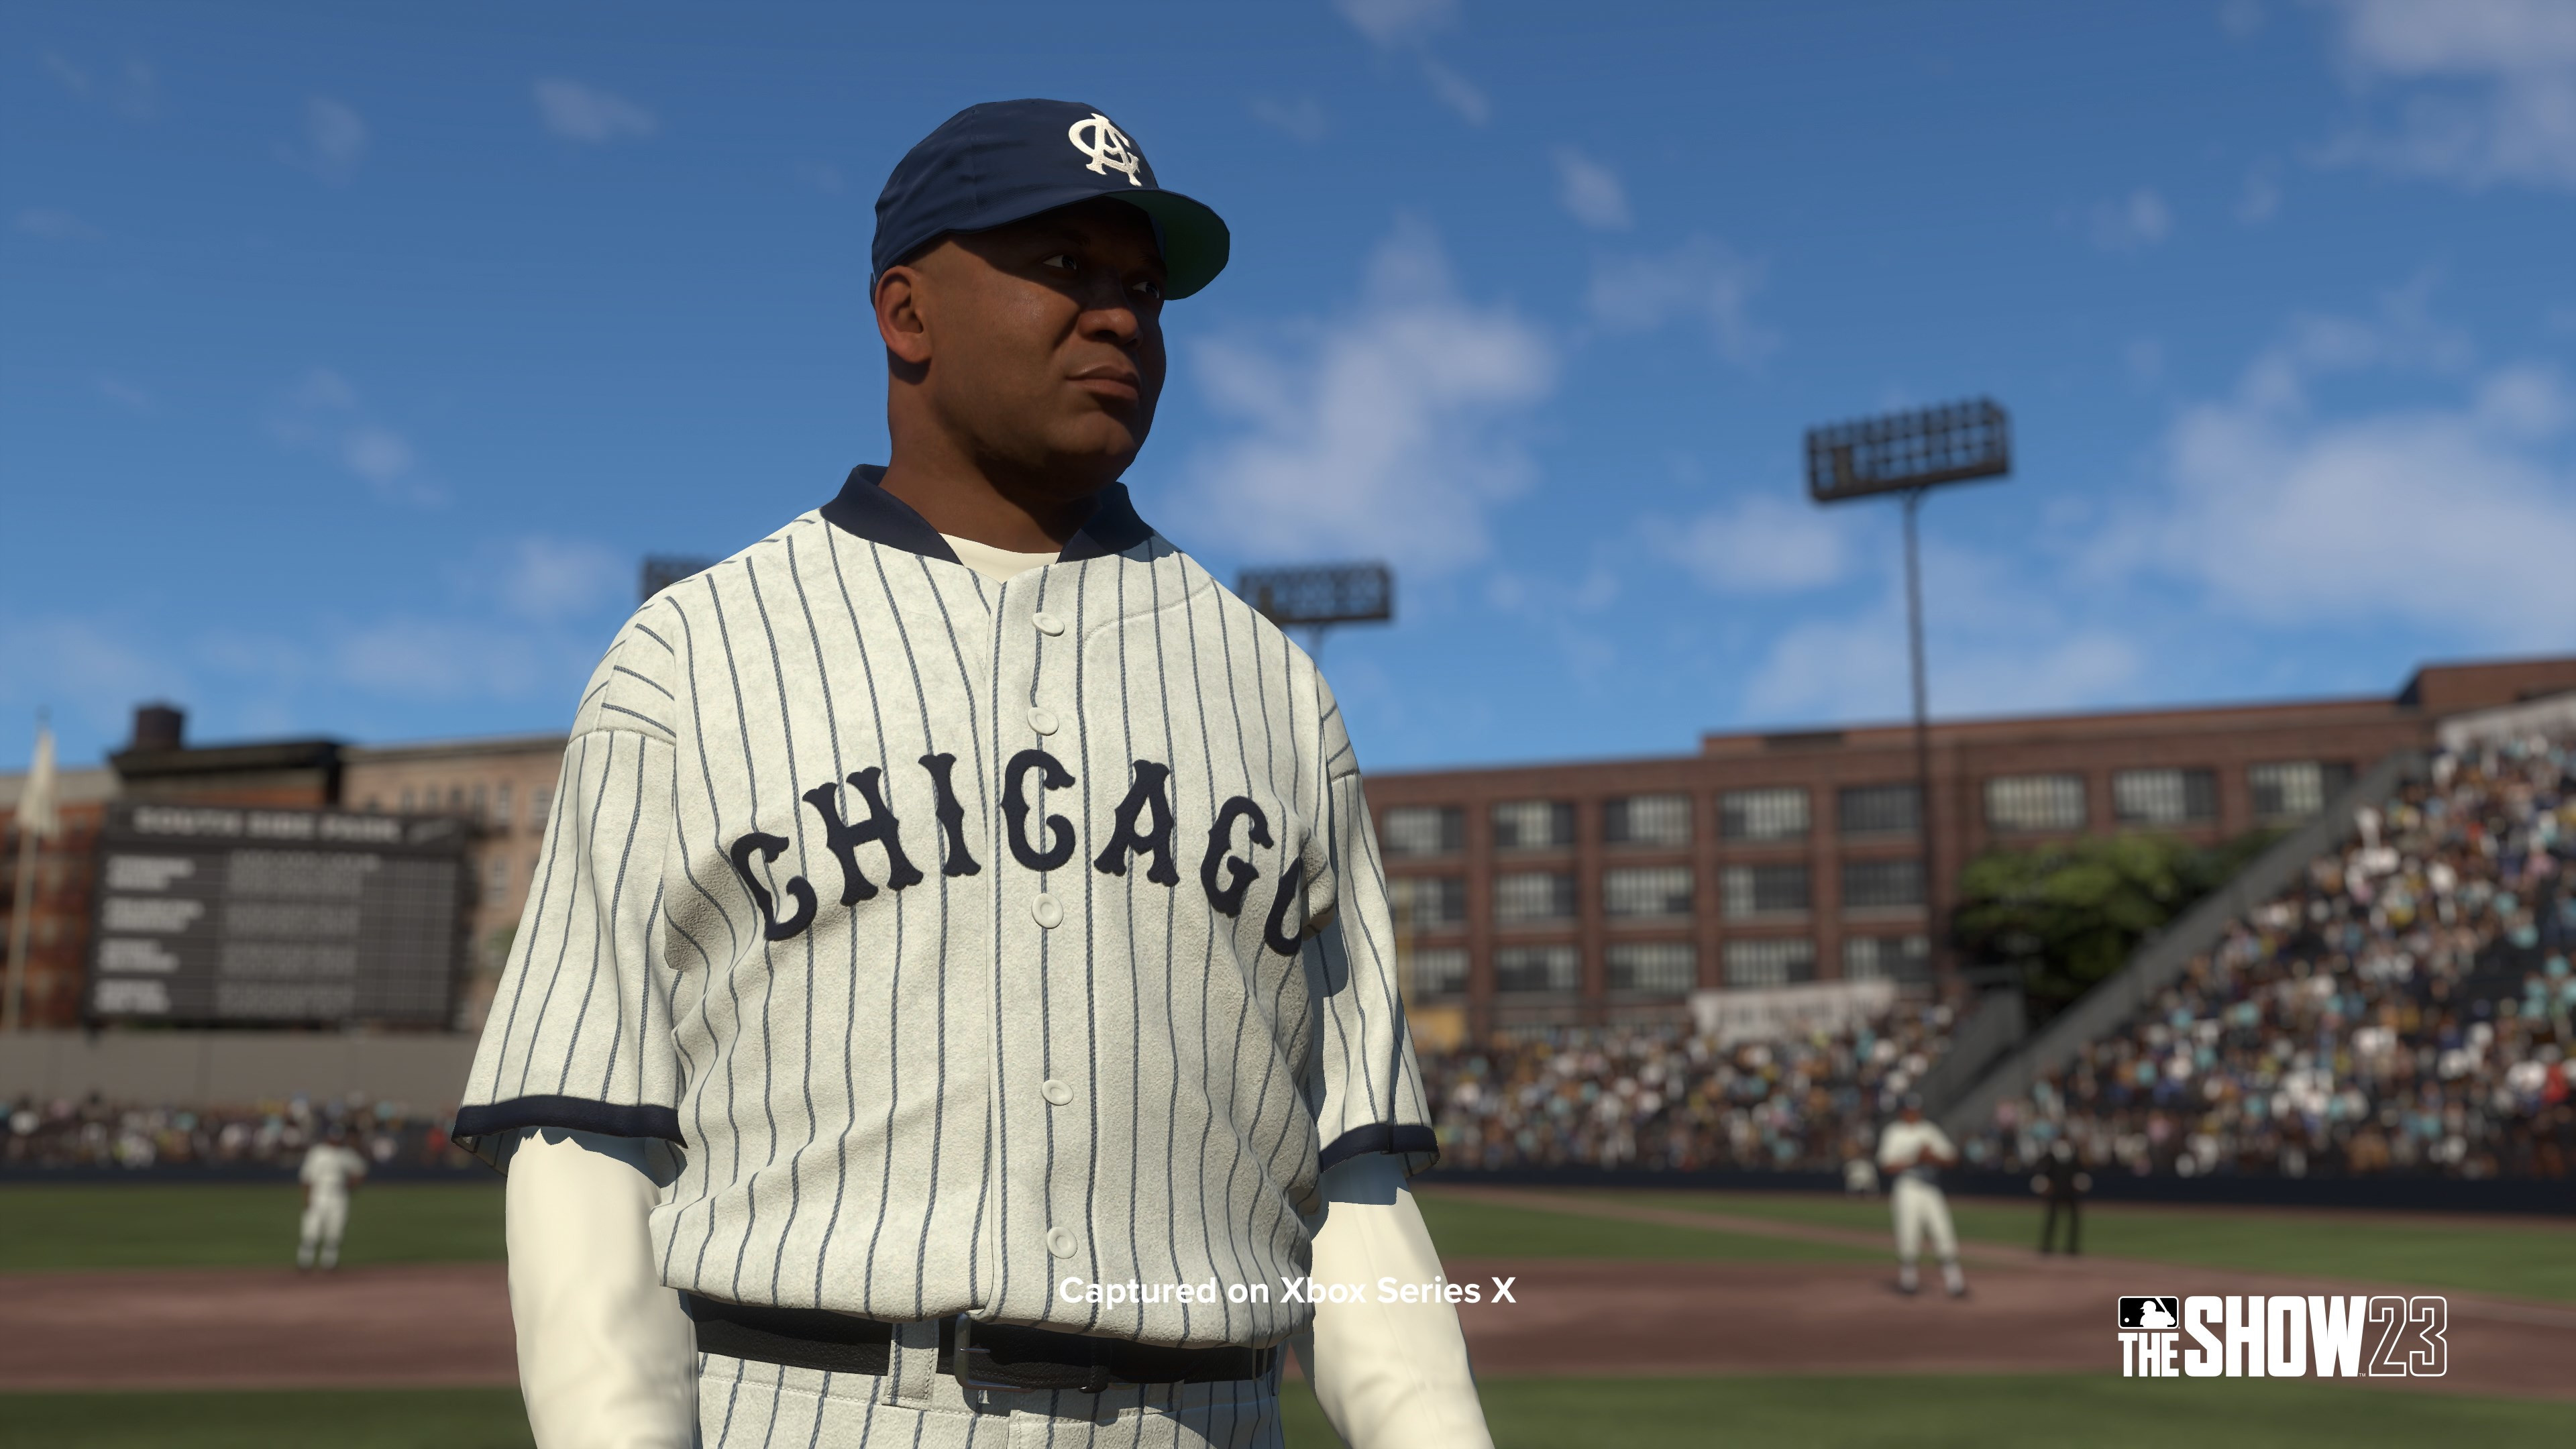 MLB The Show 23 PlayStation 5 Account Pixelpuffin.net Activation Link